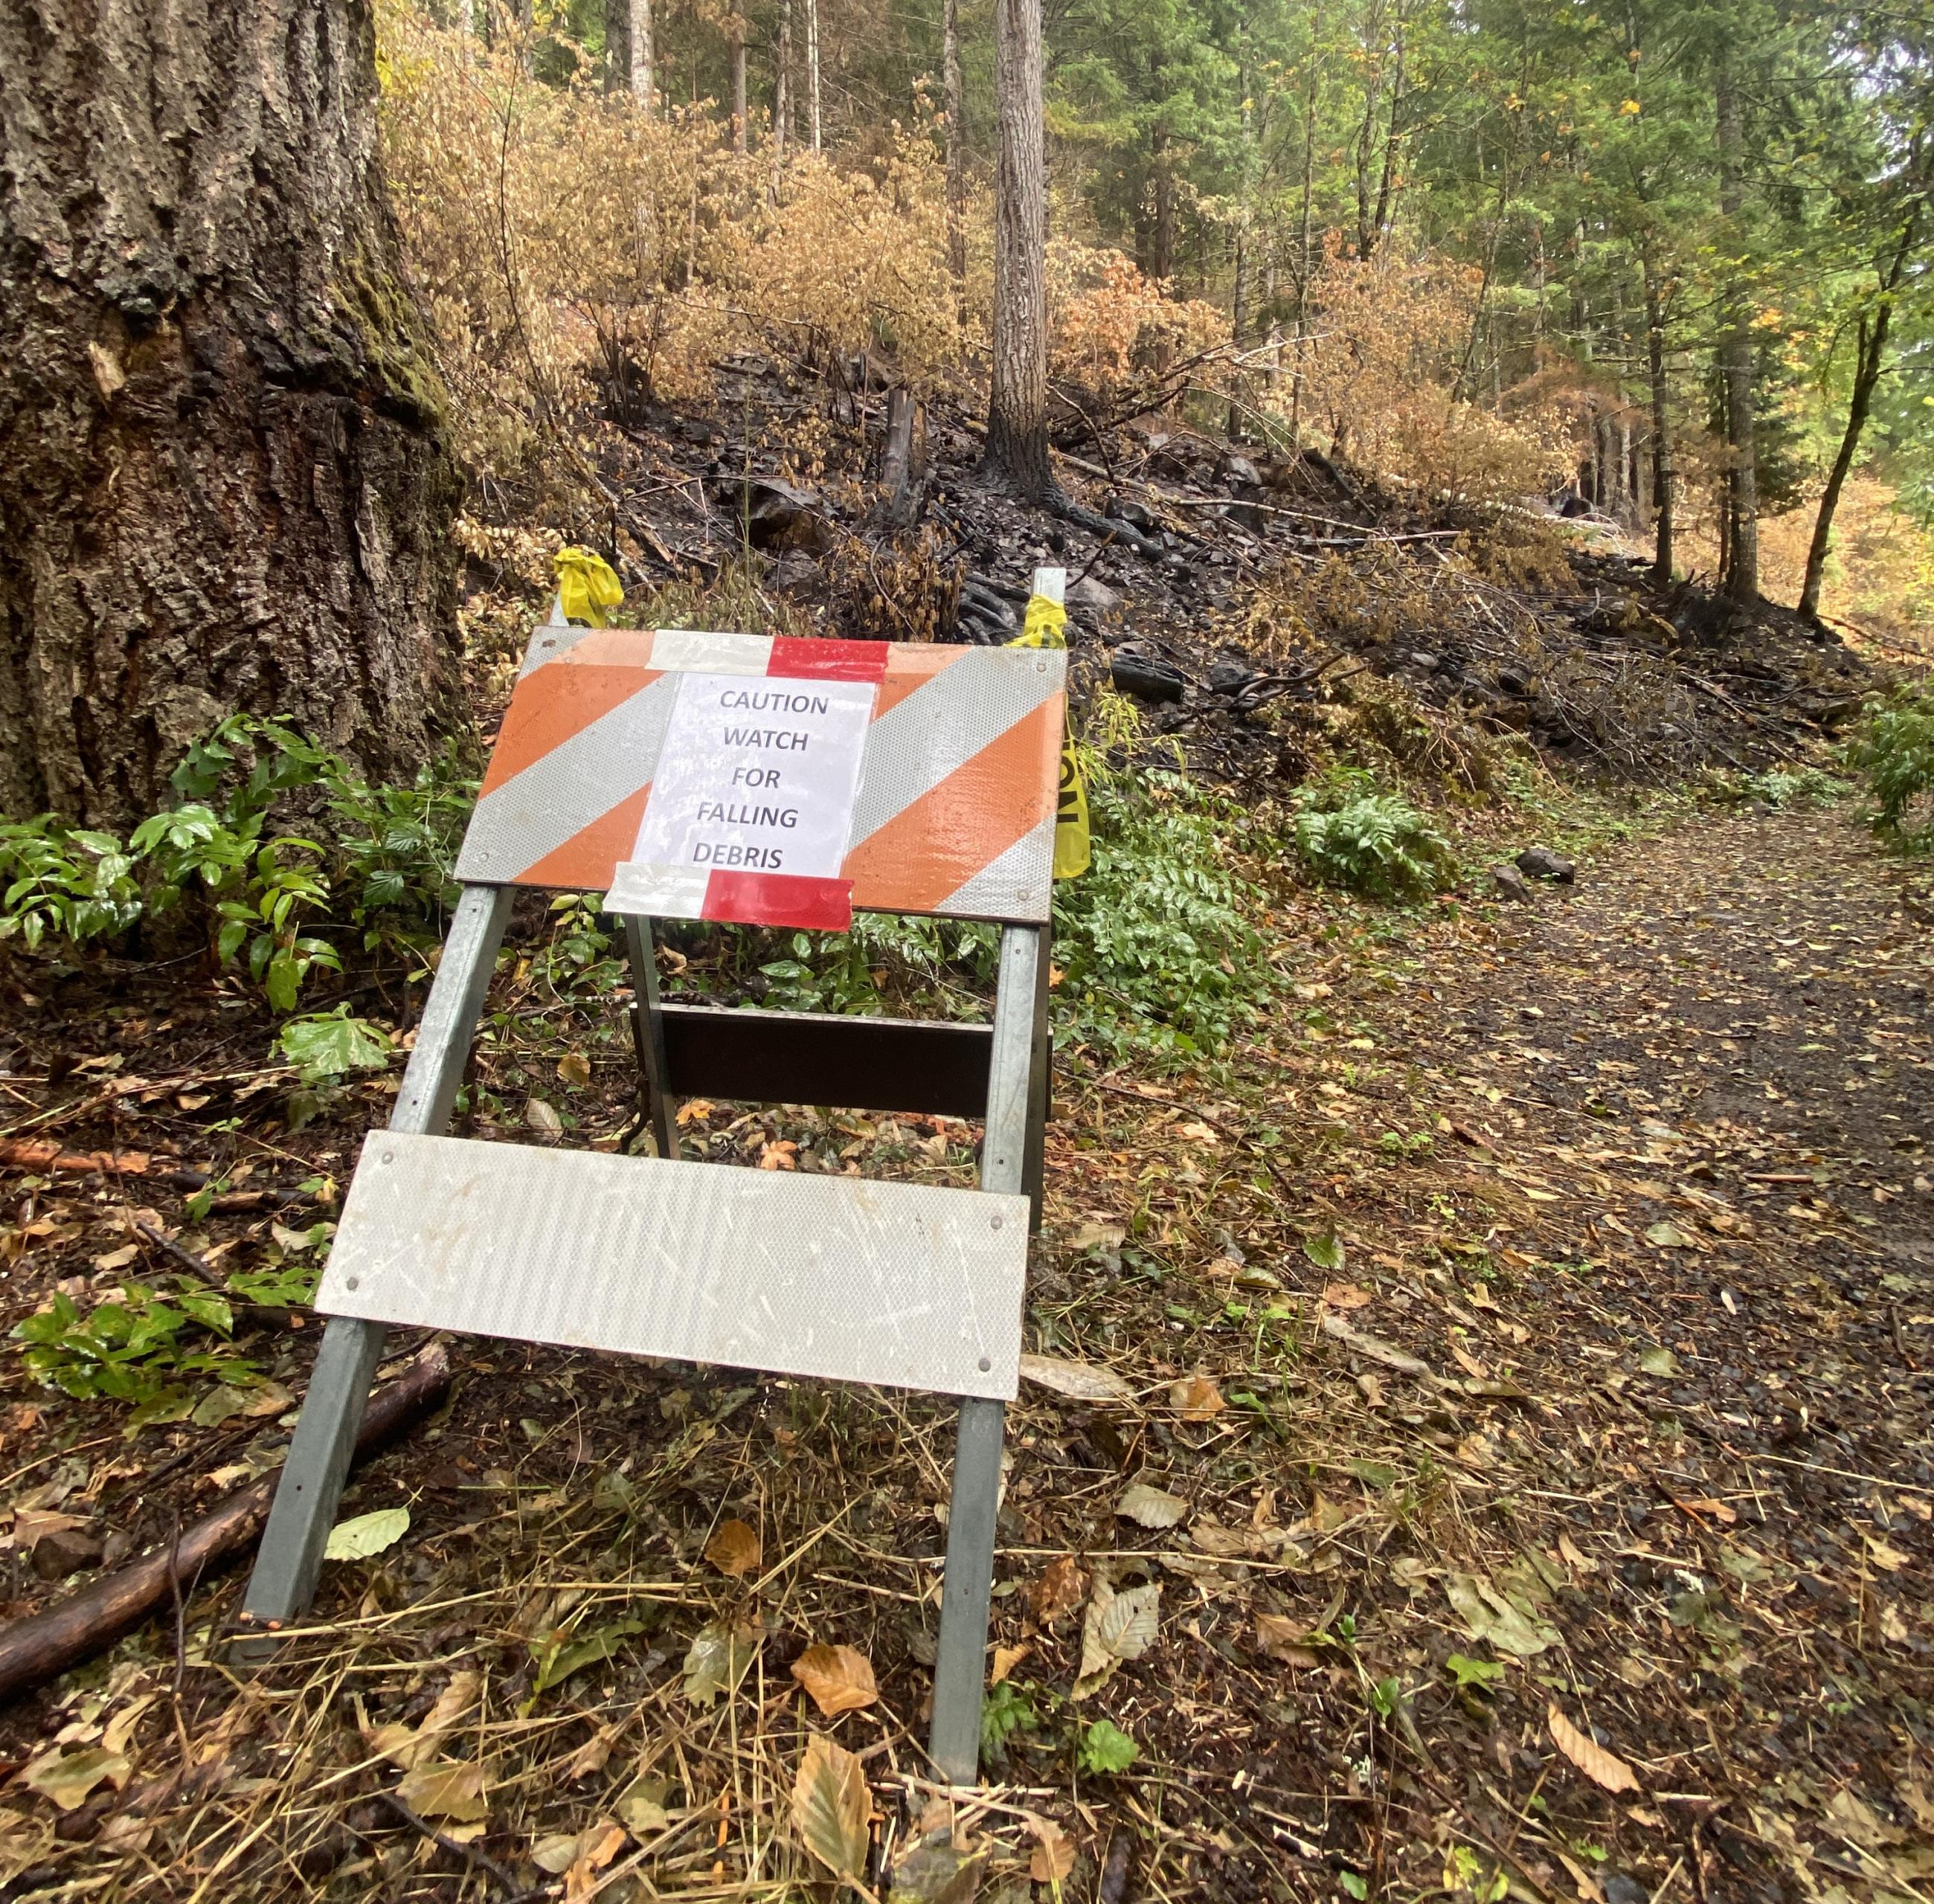 A caution sign is placed in front of a burned area with the words "Caution, watch for falling debris"